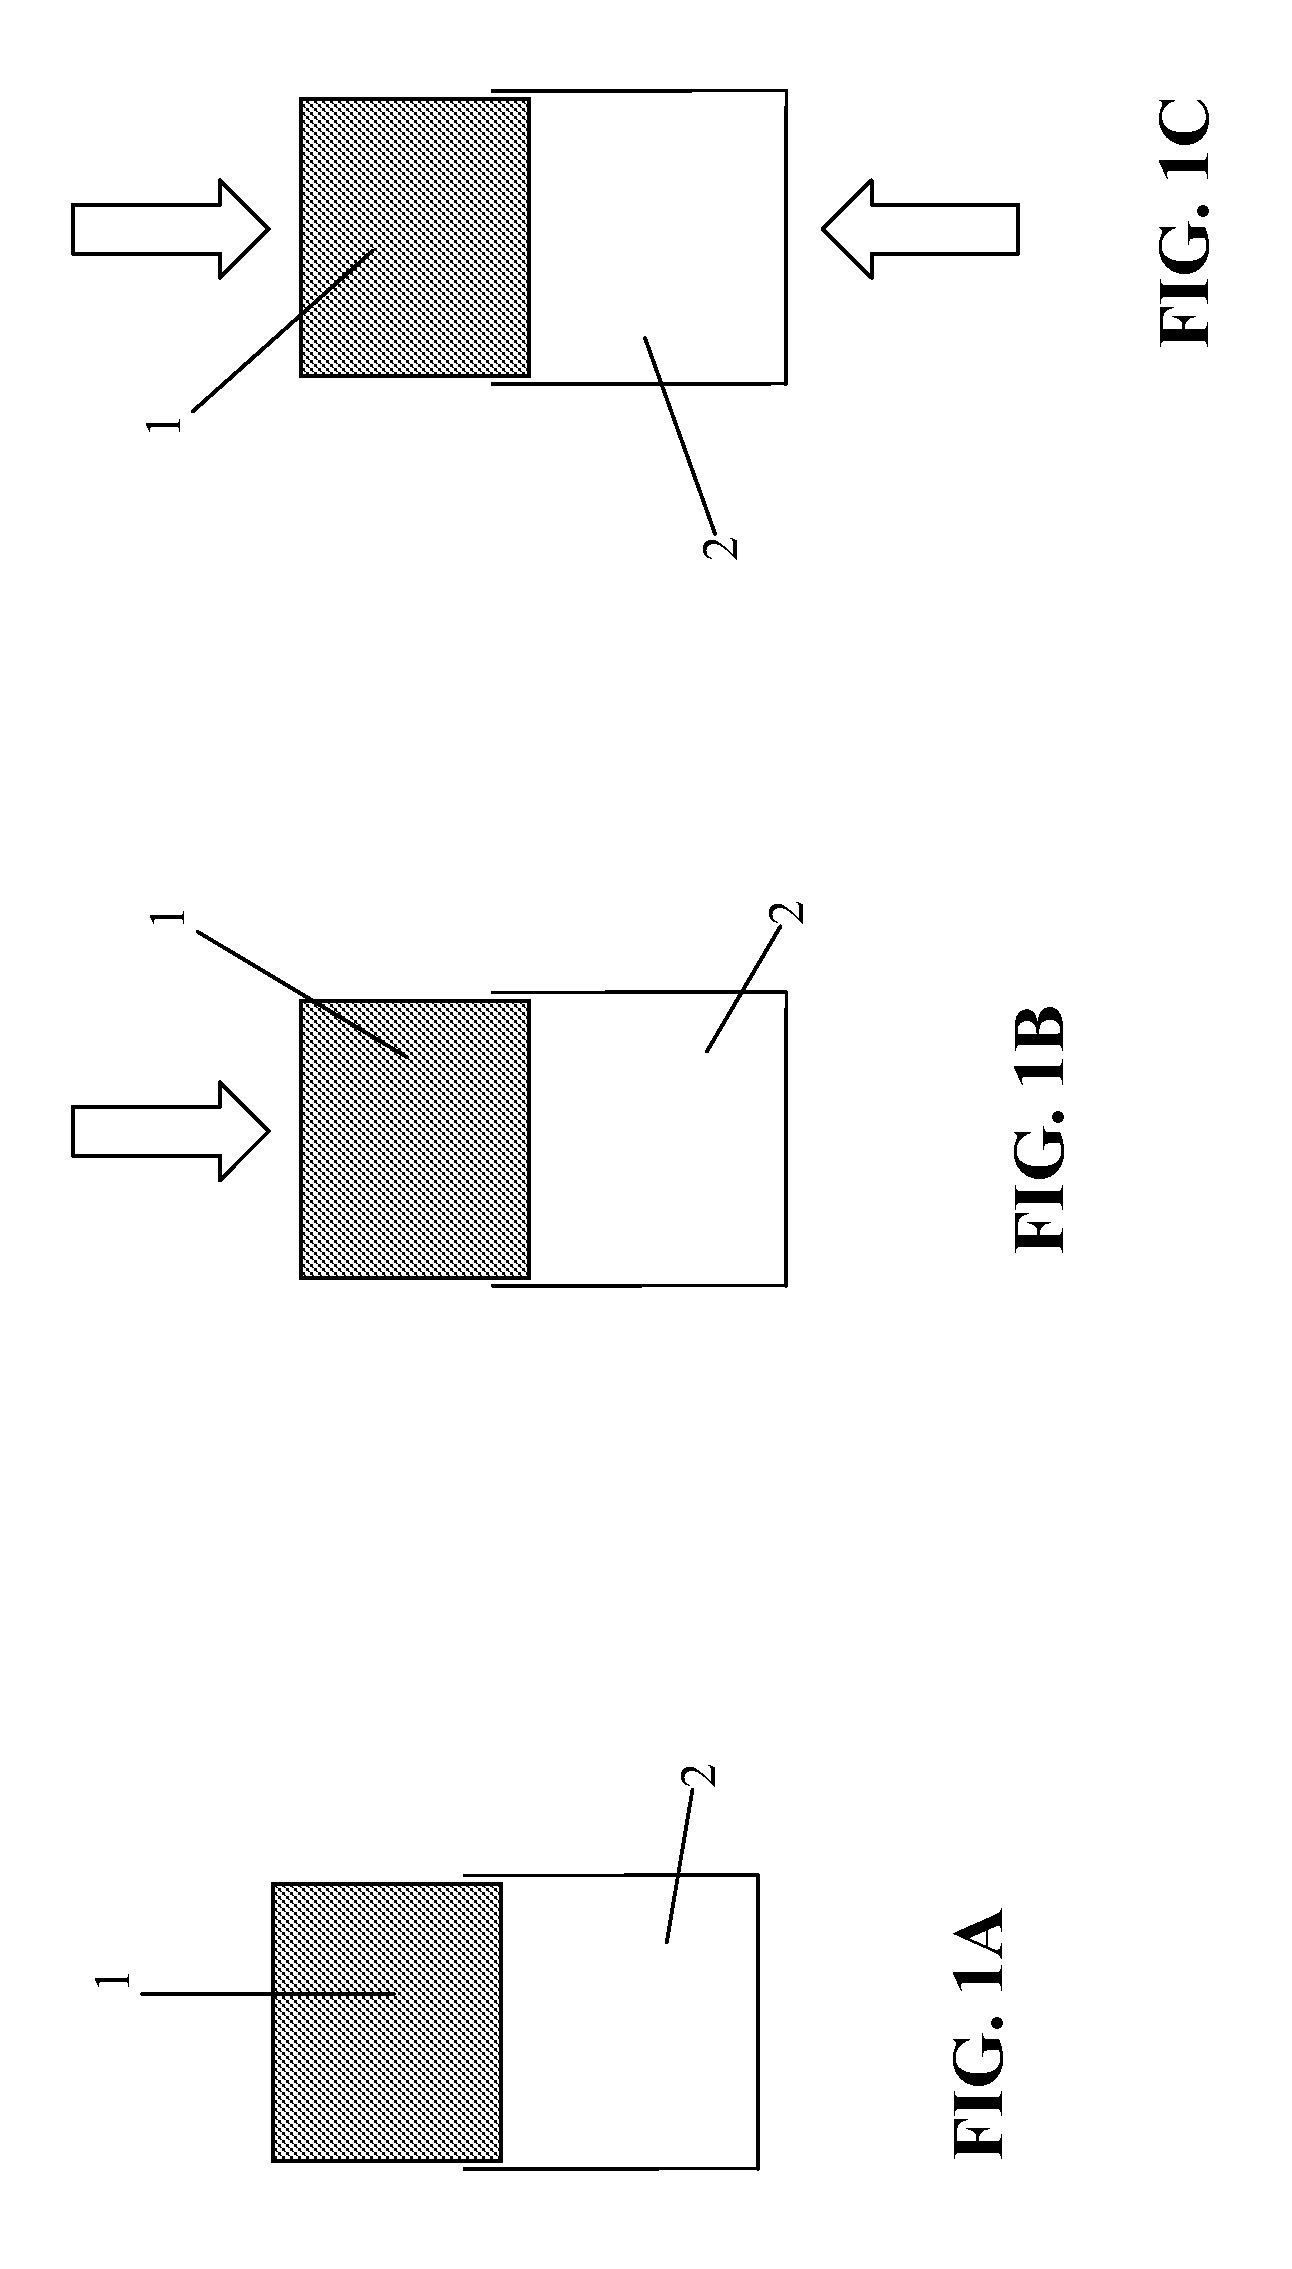 Powder mixture for manufacture of a battery electrode, a respective battery electrode and a method for manufacturing same